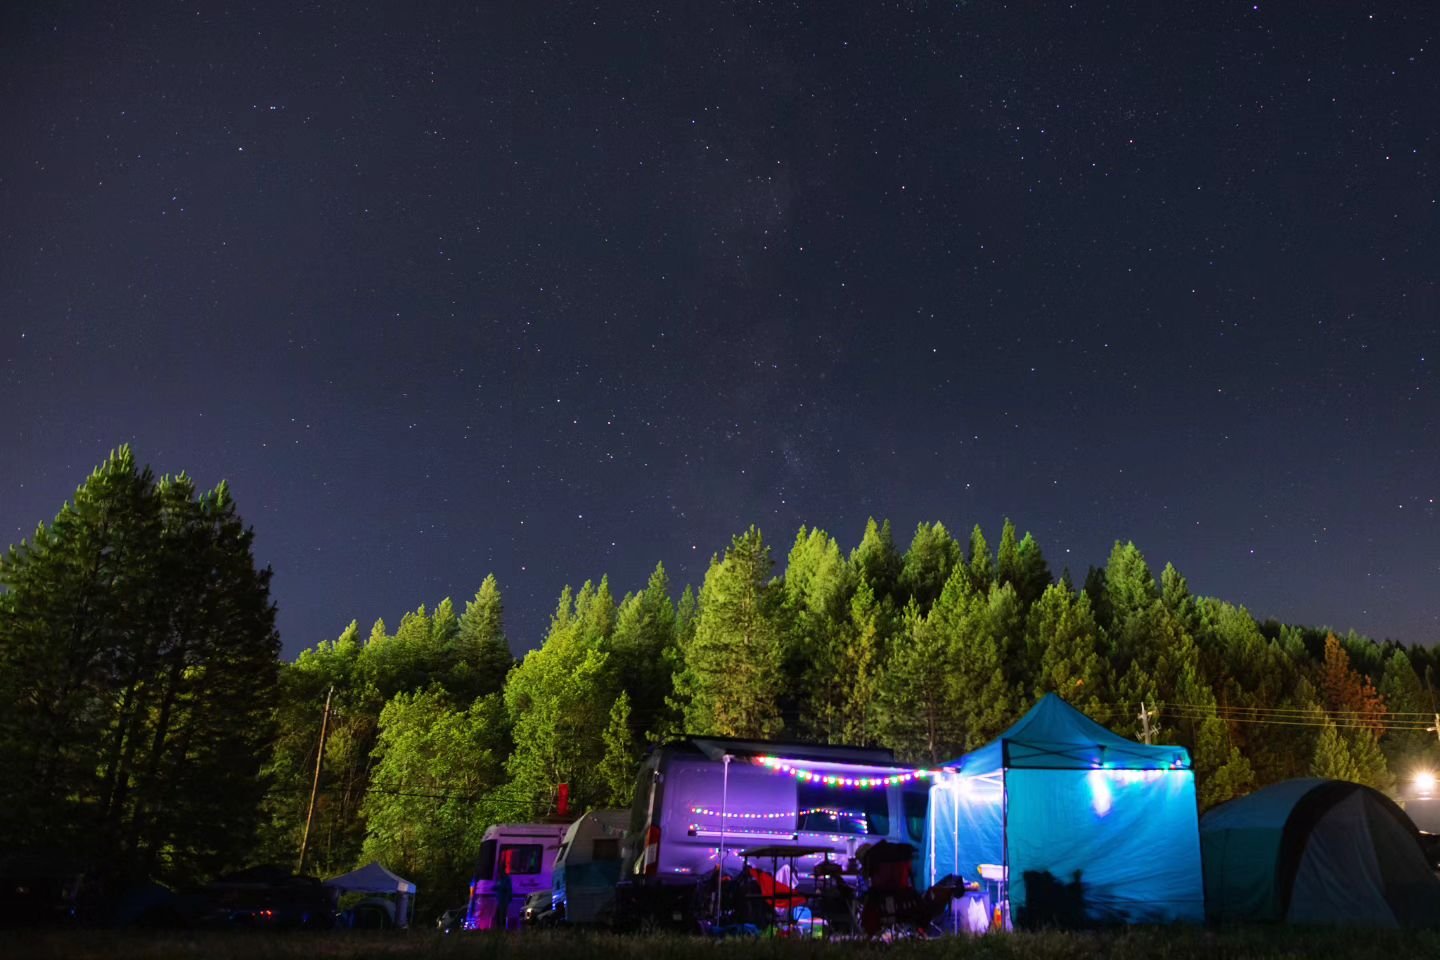 Classic Adventures RV - your home away from home at #HighSierraMusicFestival. Camping trailers, full size motorhomes, budget RV - whatever your price point, they'll help you have the best weekend you can in Quincy.

📷: @trevbex